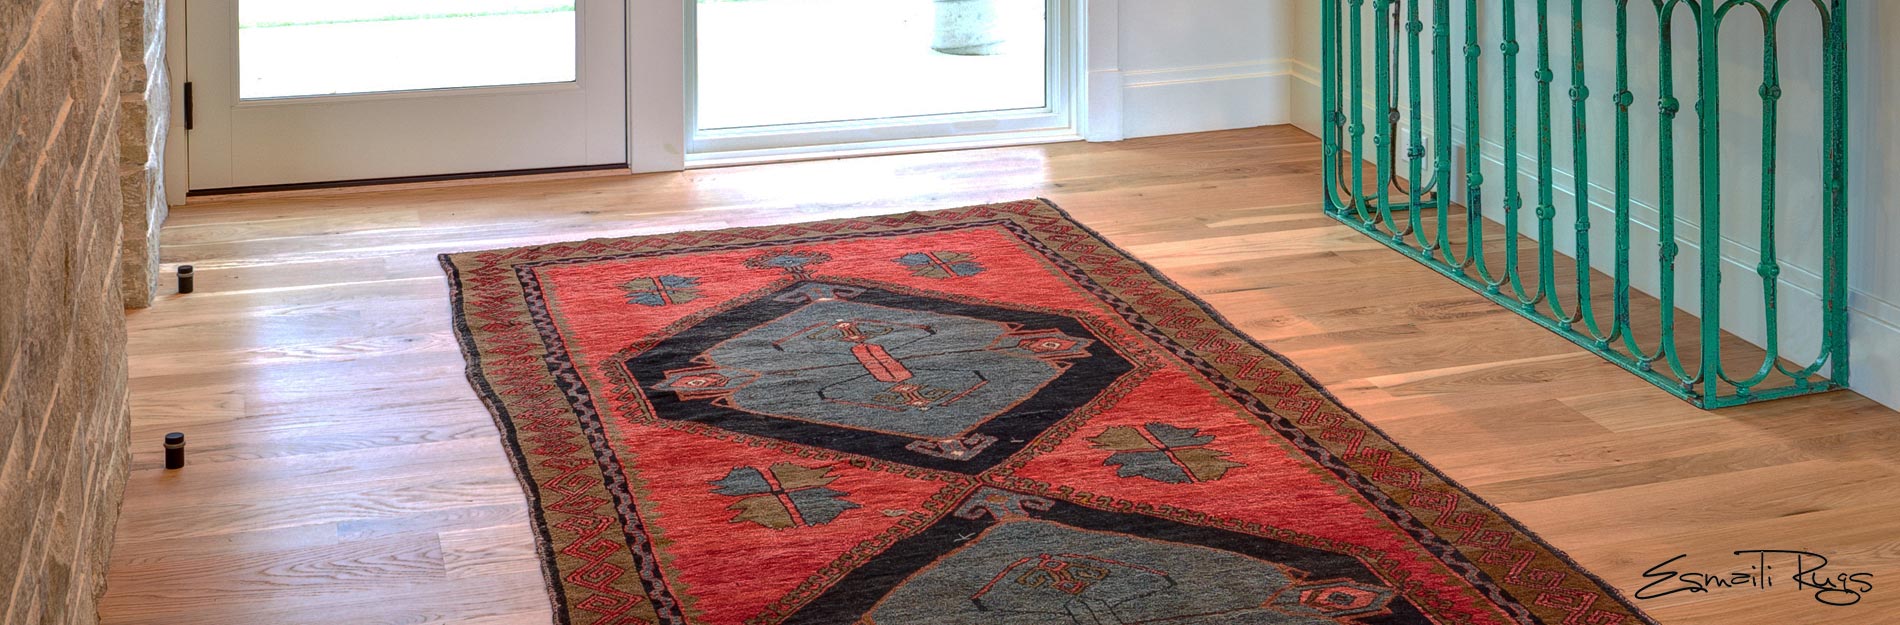 Pairing Antique Rugs Carpets with Modern Decor